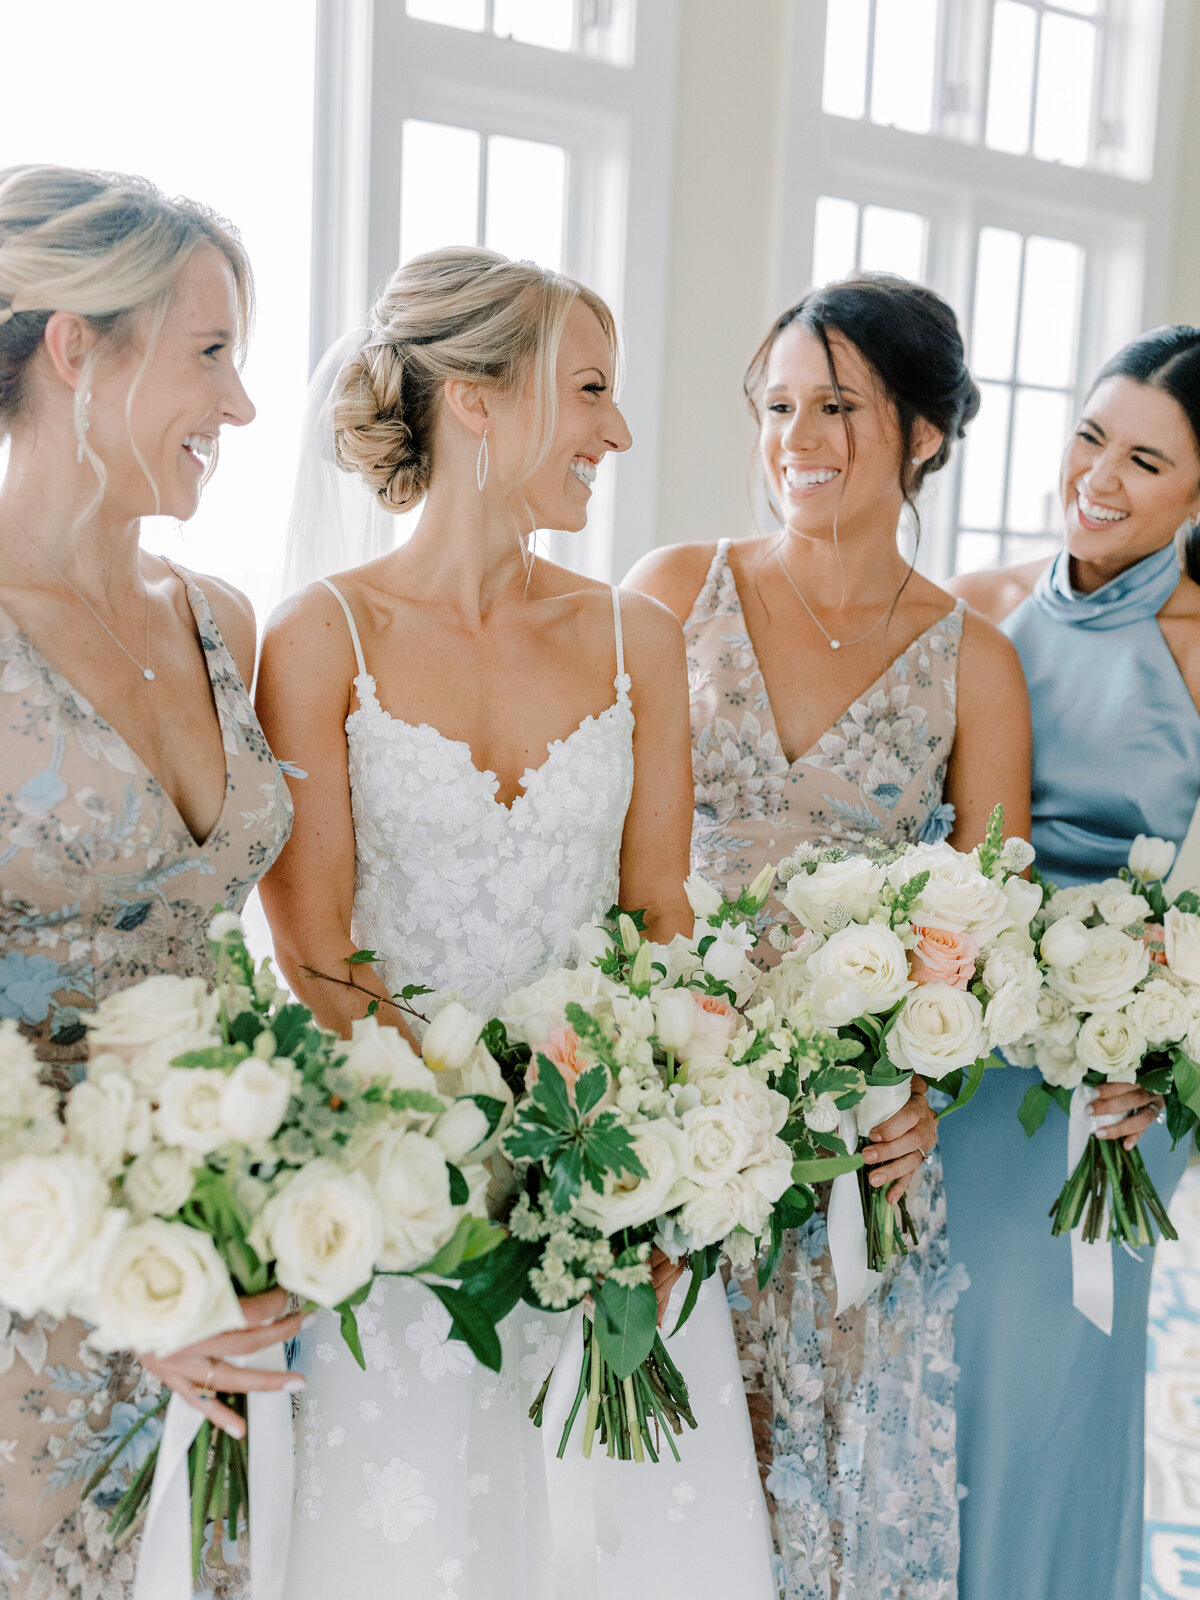 Bride smiling at her bridesmaids in floral dresses holding big white and green bouquets